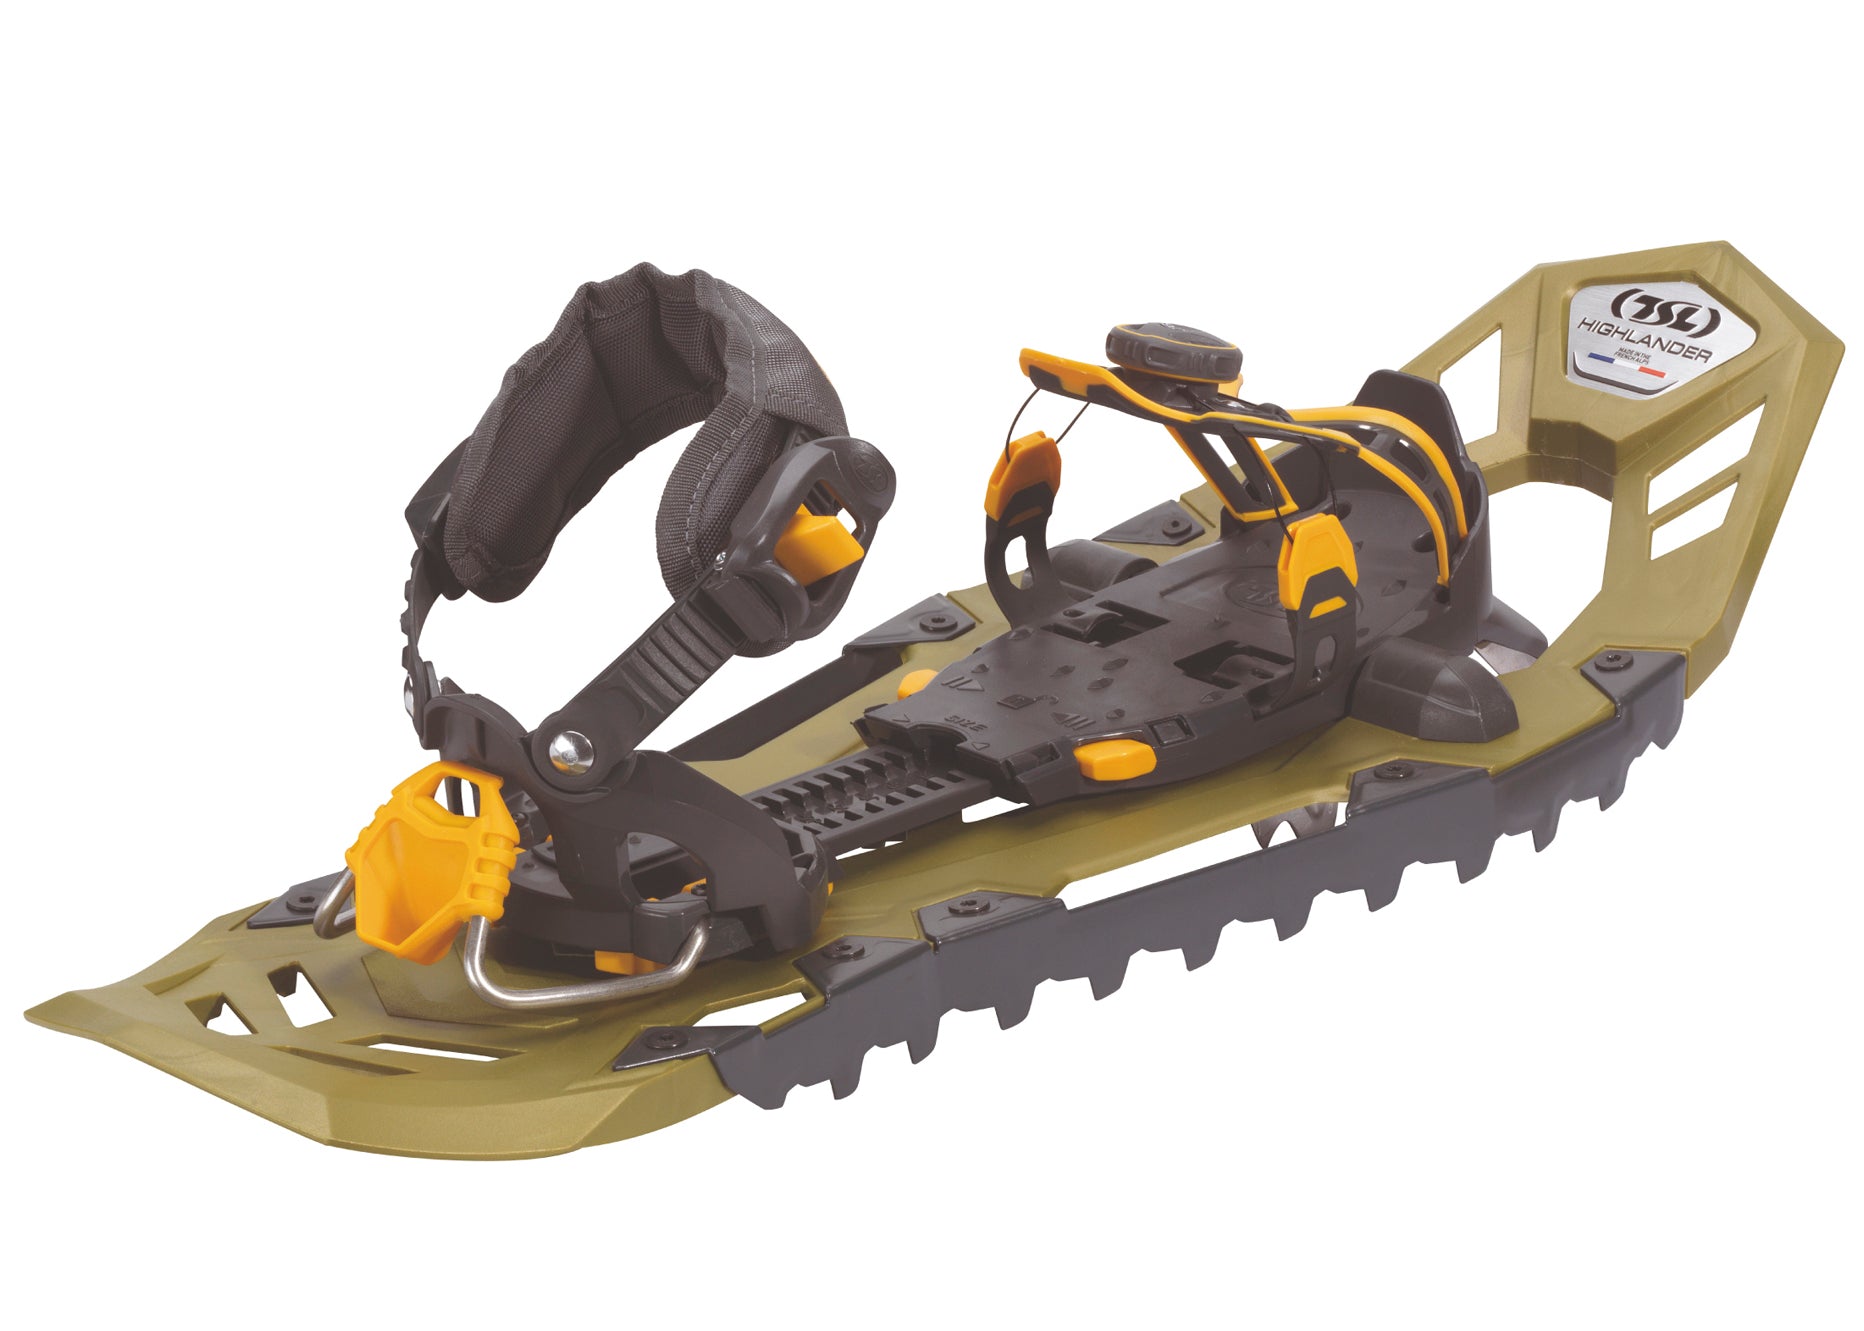 Crossblades Snowshoes – Snowshoes for driving!